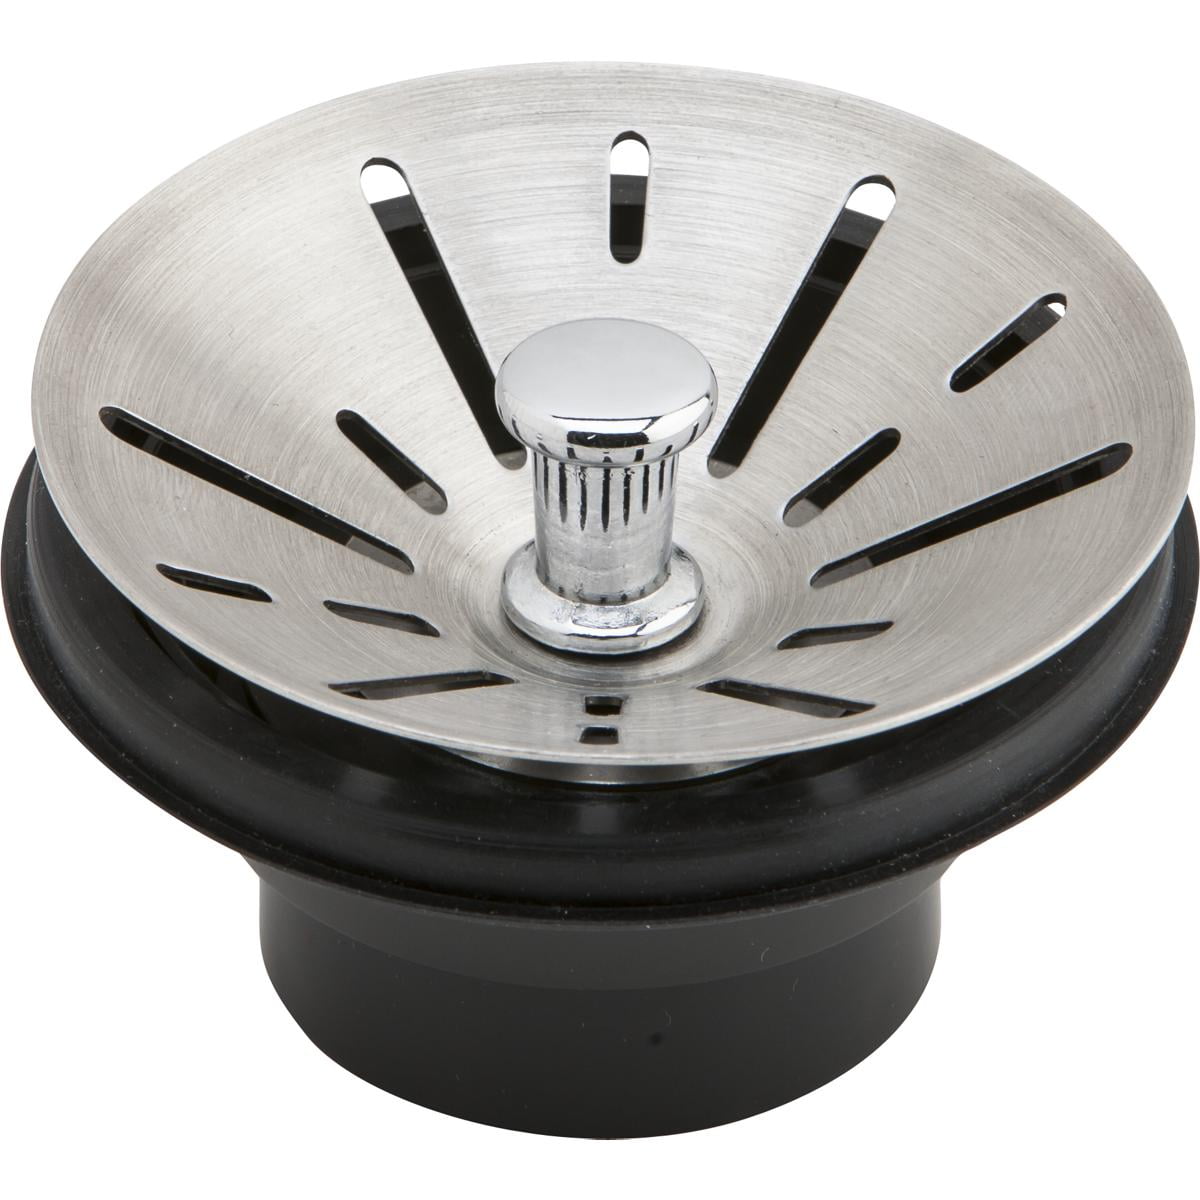 GZILA Garbage Disposal Strainer and Stopper with Decorative Disposal Flange  in Black, Fit 3.5 Inch Standard Drain Hole